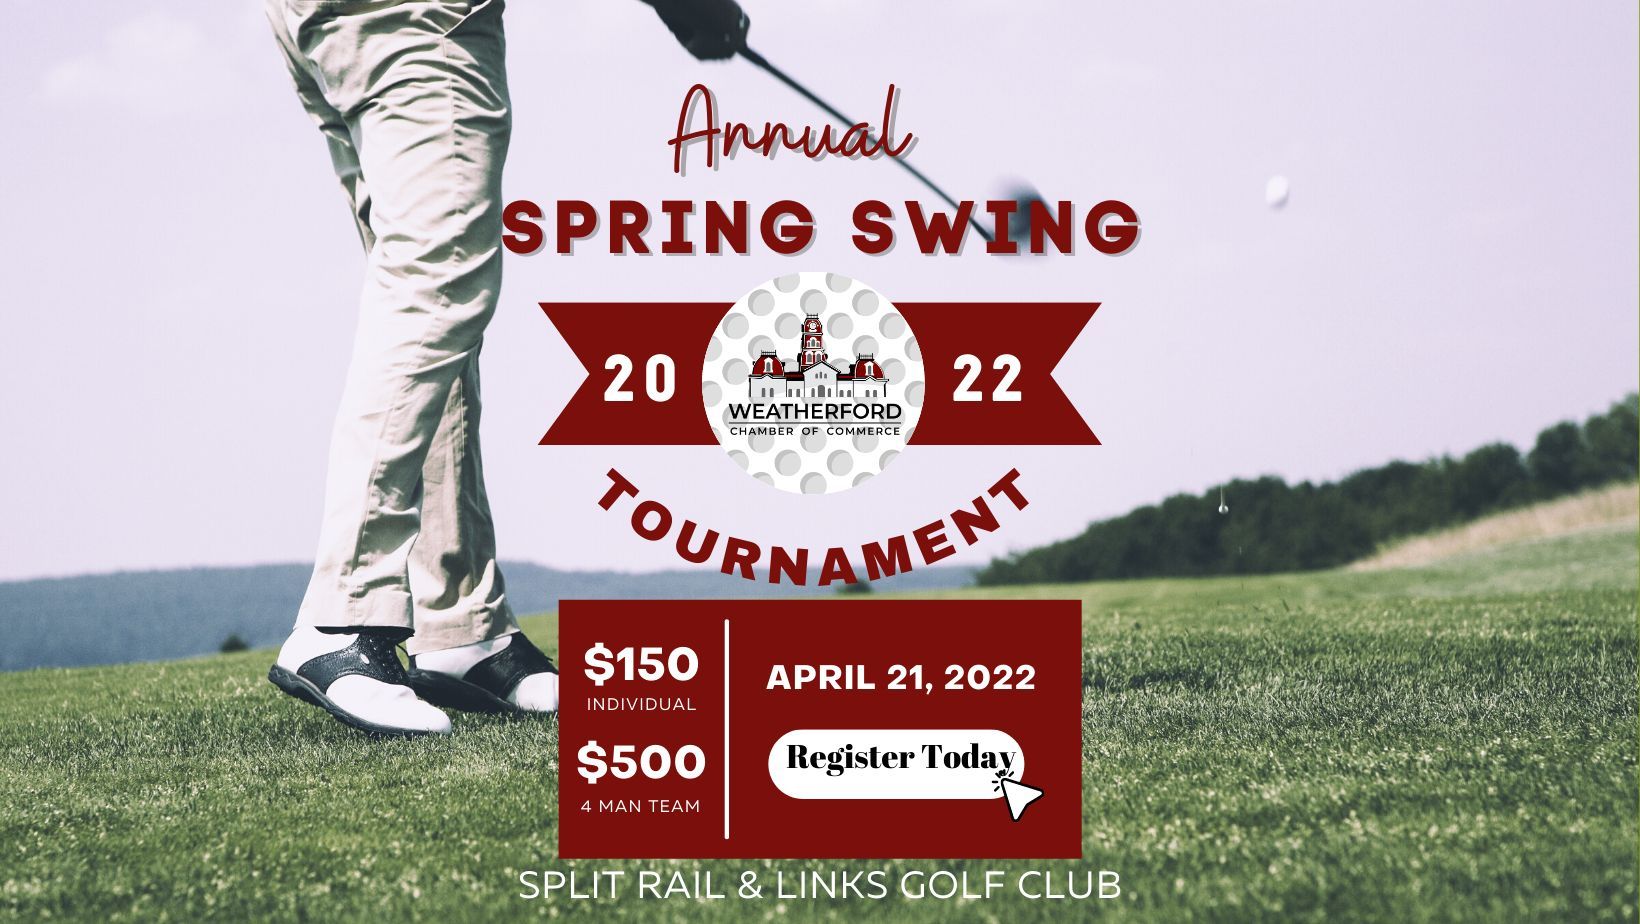 Spring Swing 2022 Facebook Cover without link 1